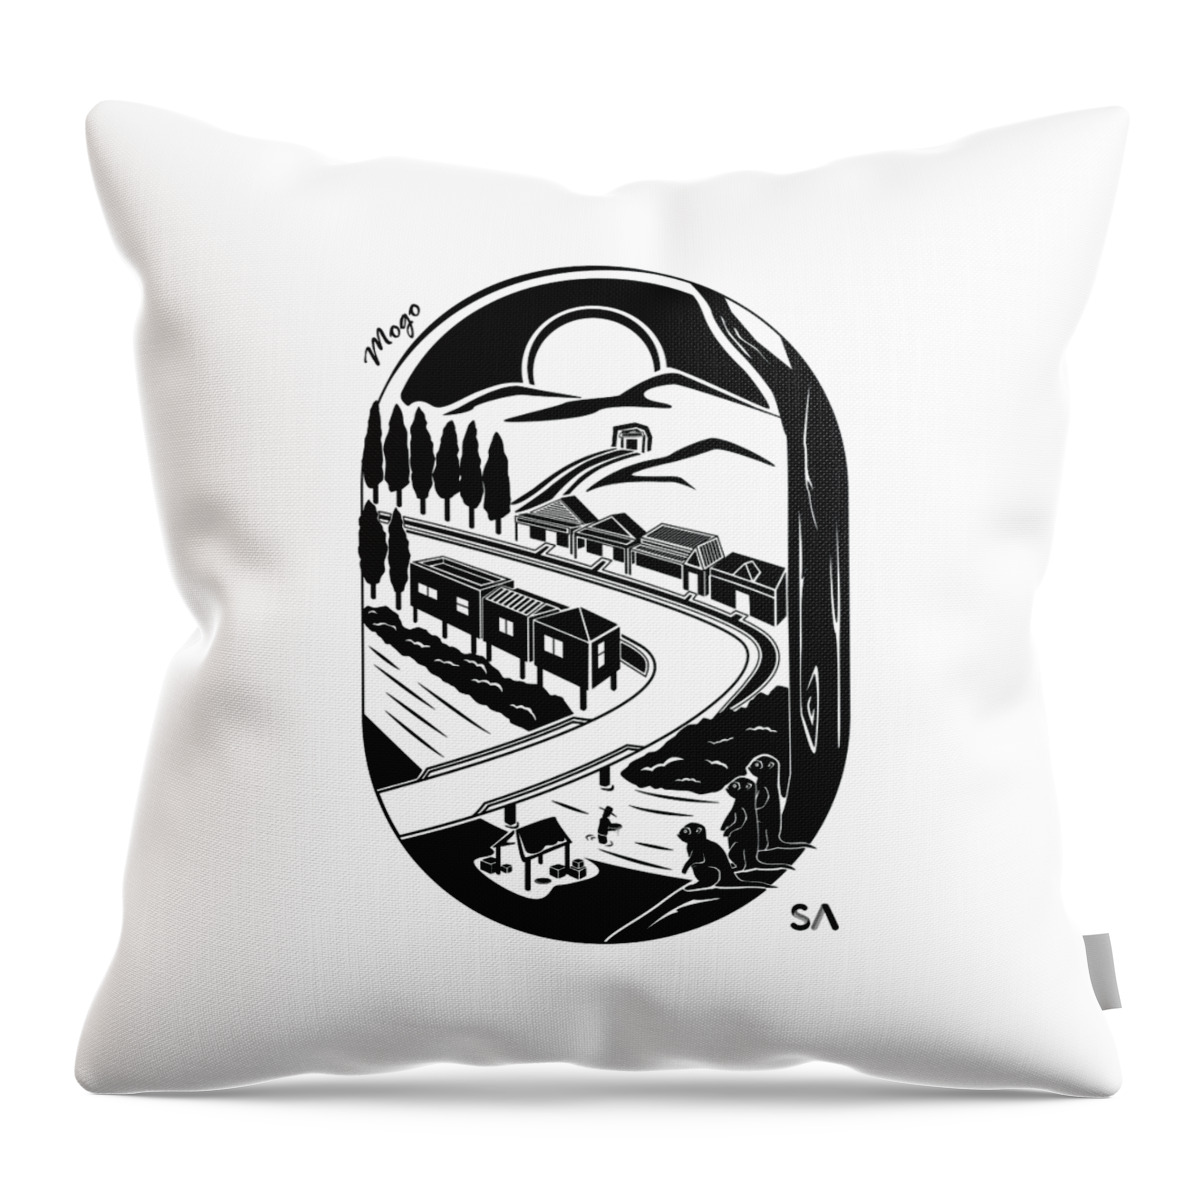 Black And White Throw Pillow featuring the digital art Mogo by Silvio Ary Cavalcante